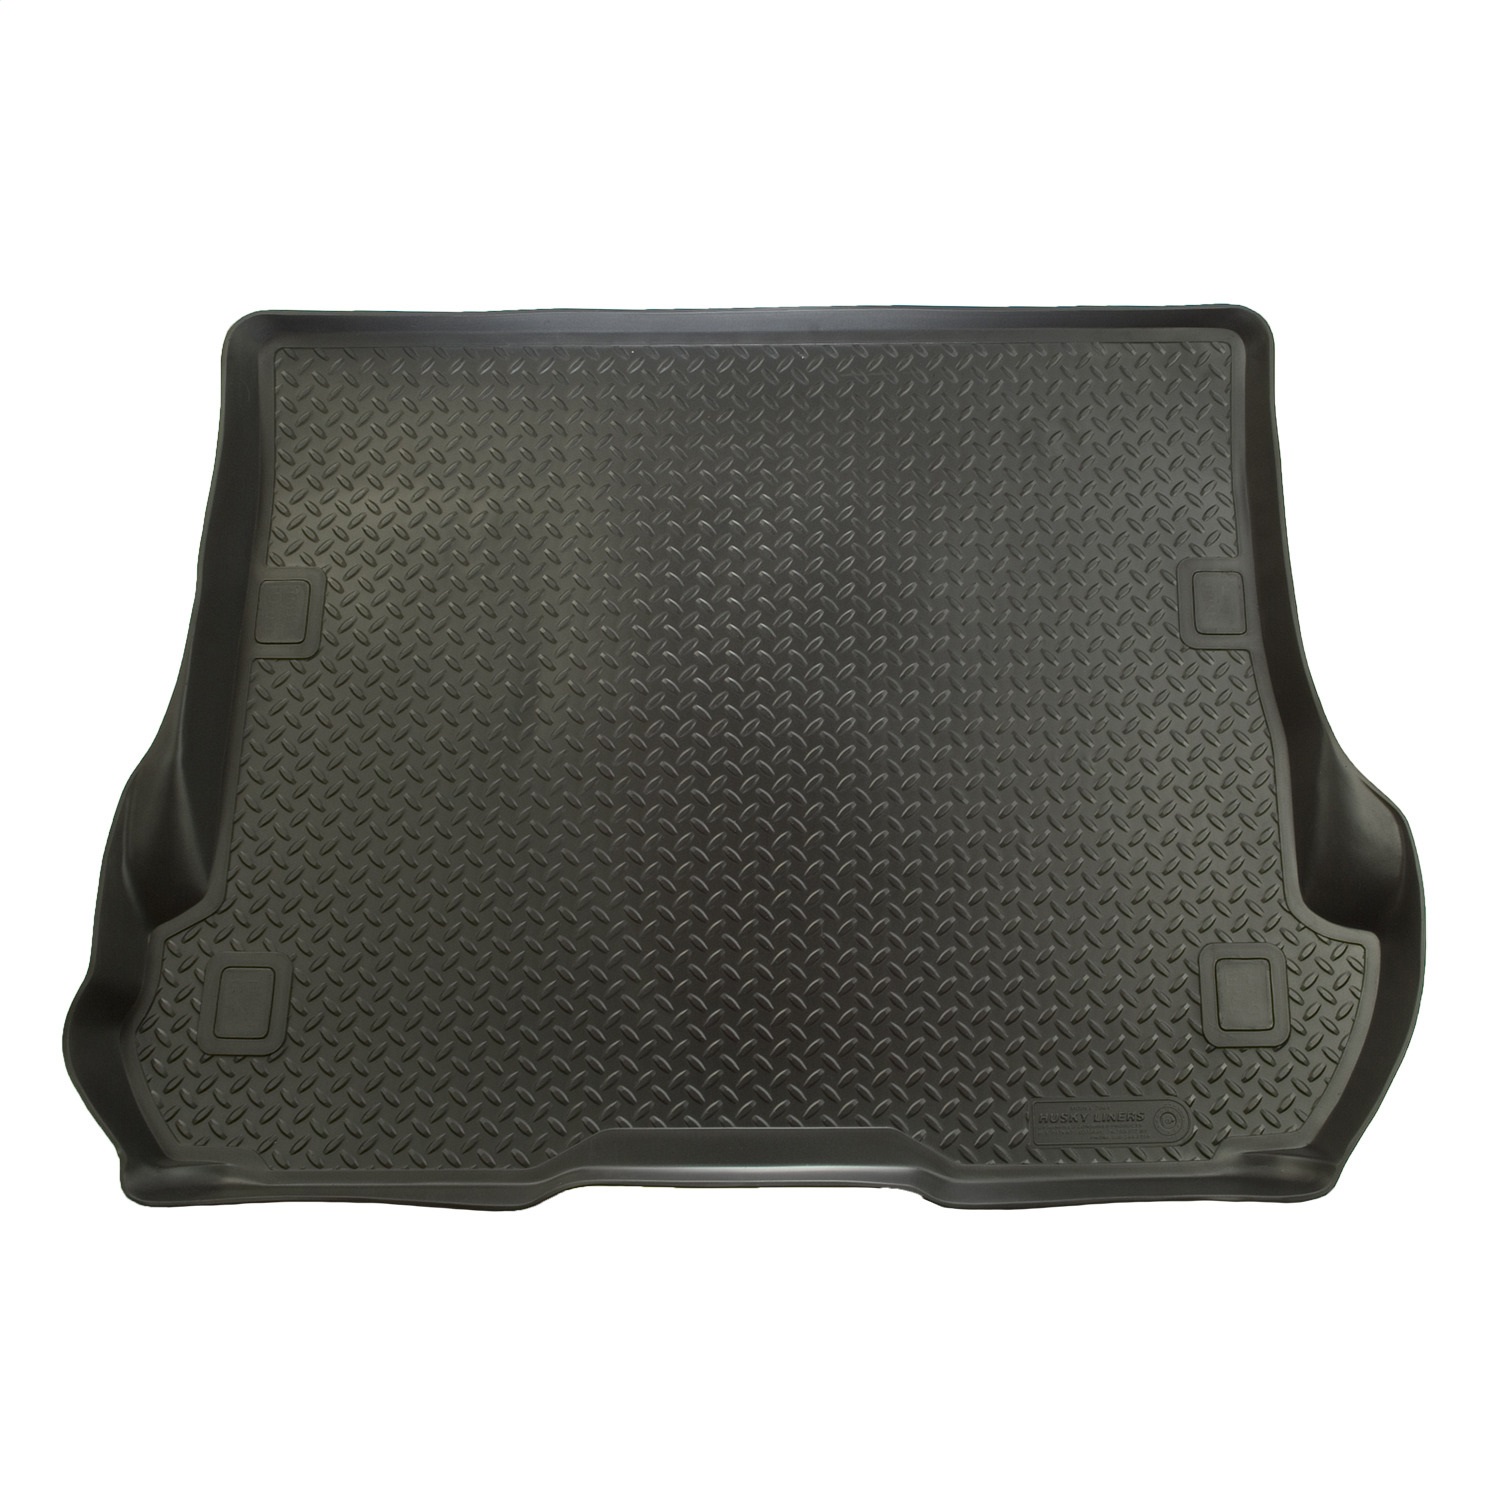 Husky Liners Husky Liners 20031 Classic Style; Cargo Liner Fits 09-15 Journey